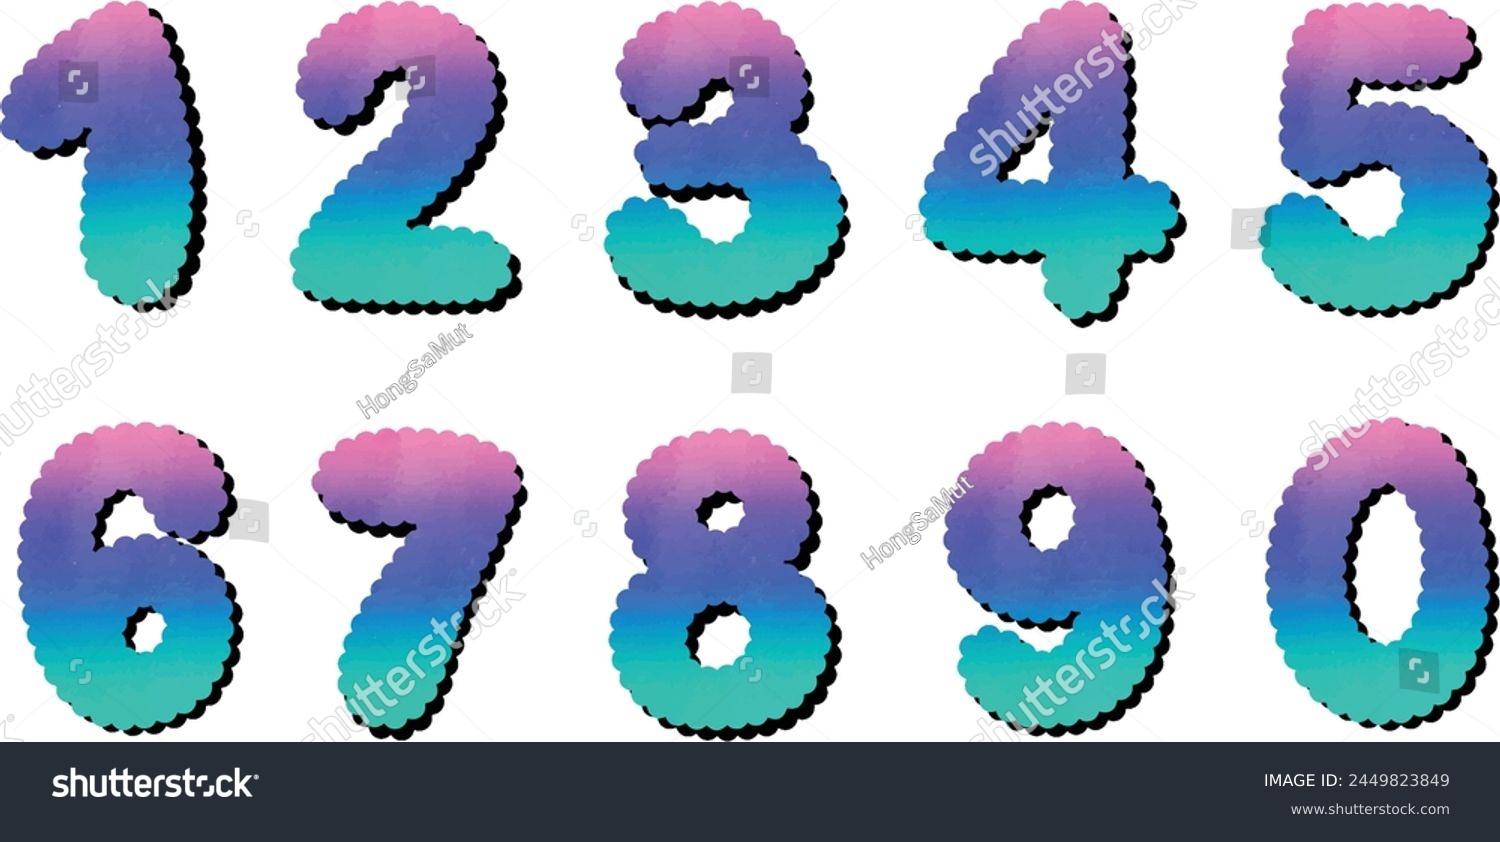 SVG of Hand drawn numbers 1234567890 with color gradient svg